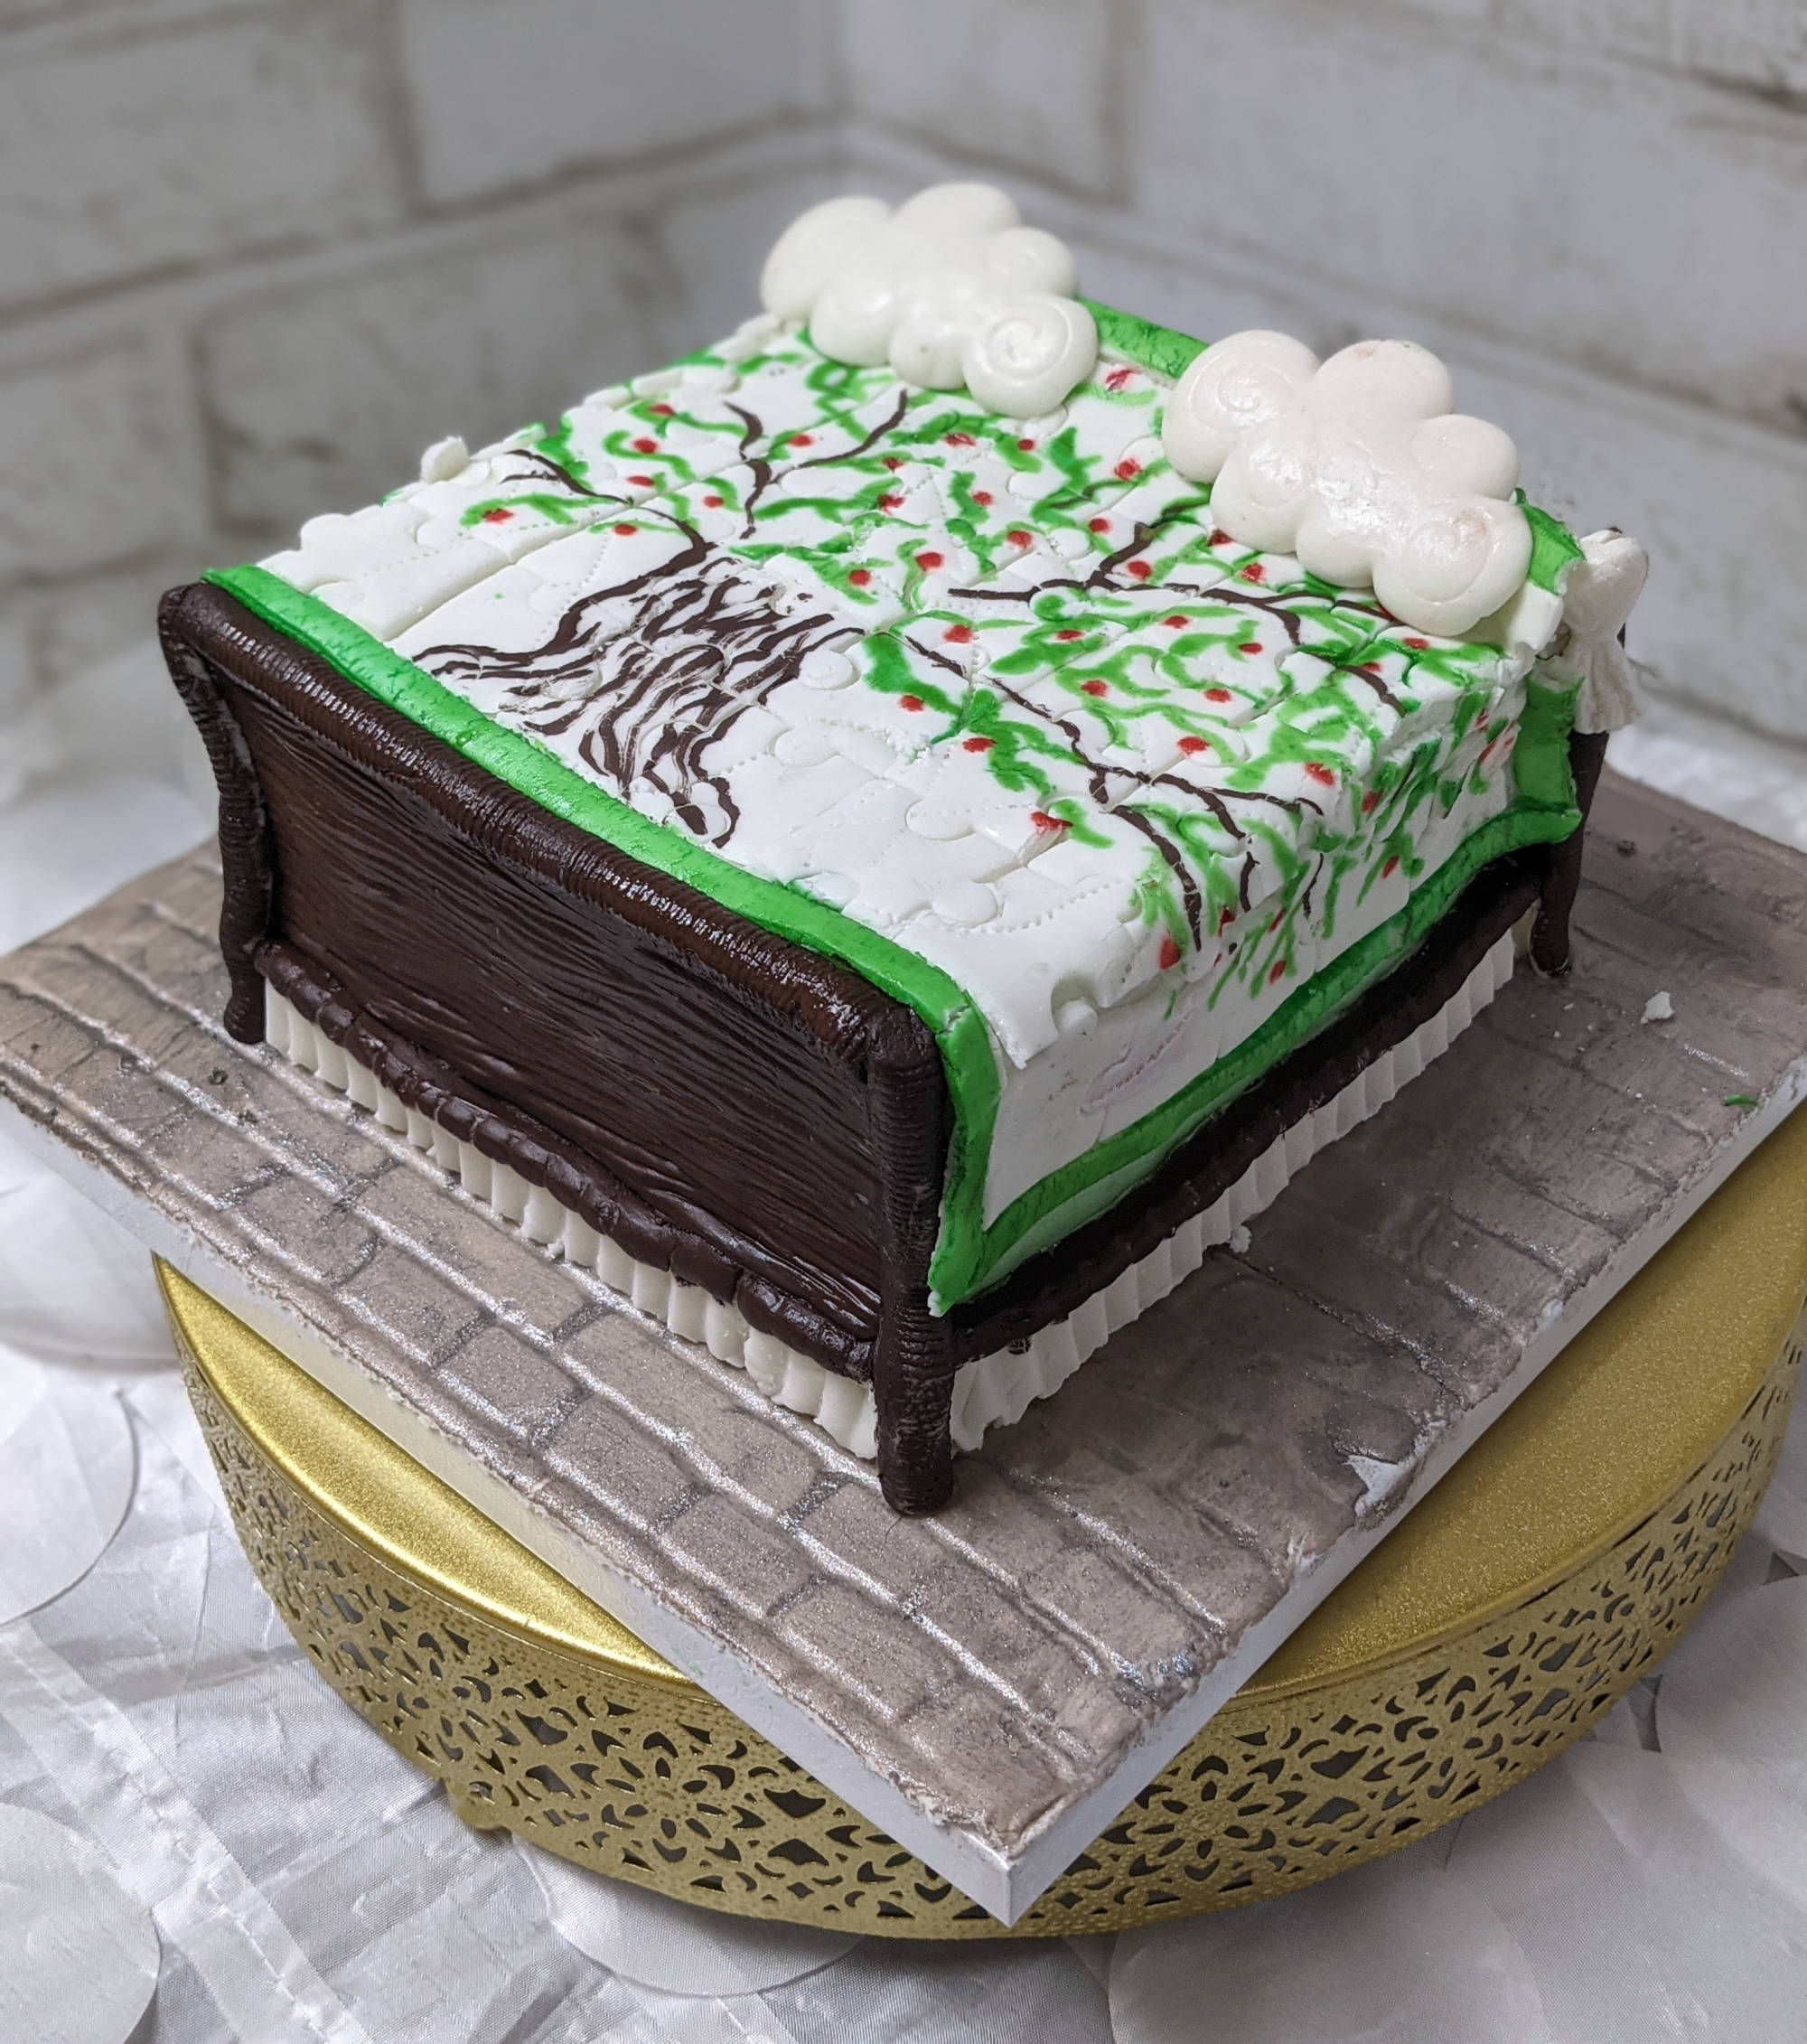 Bed cake by Erin Purdey